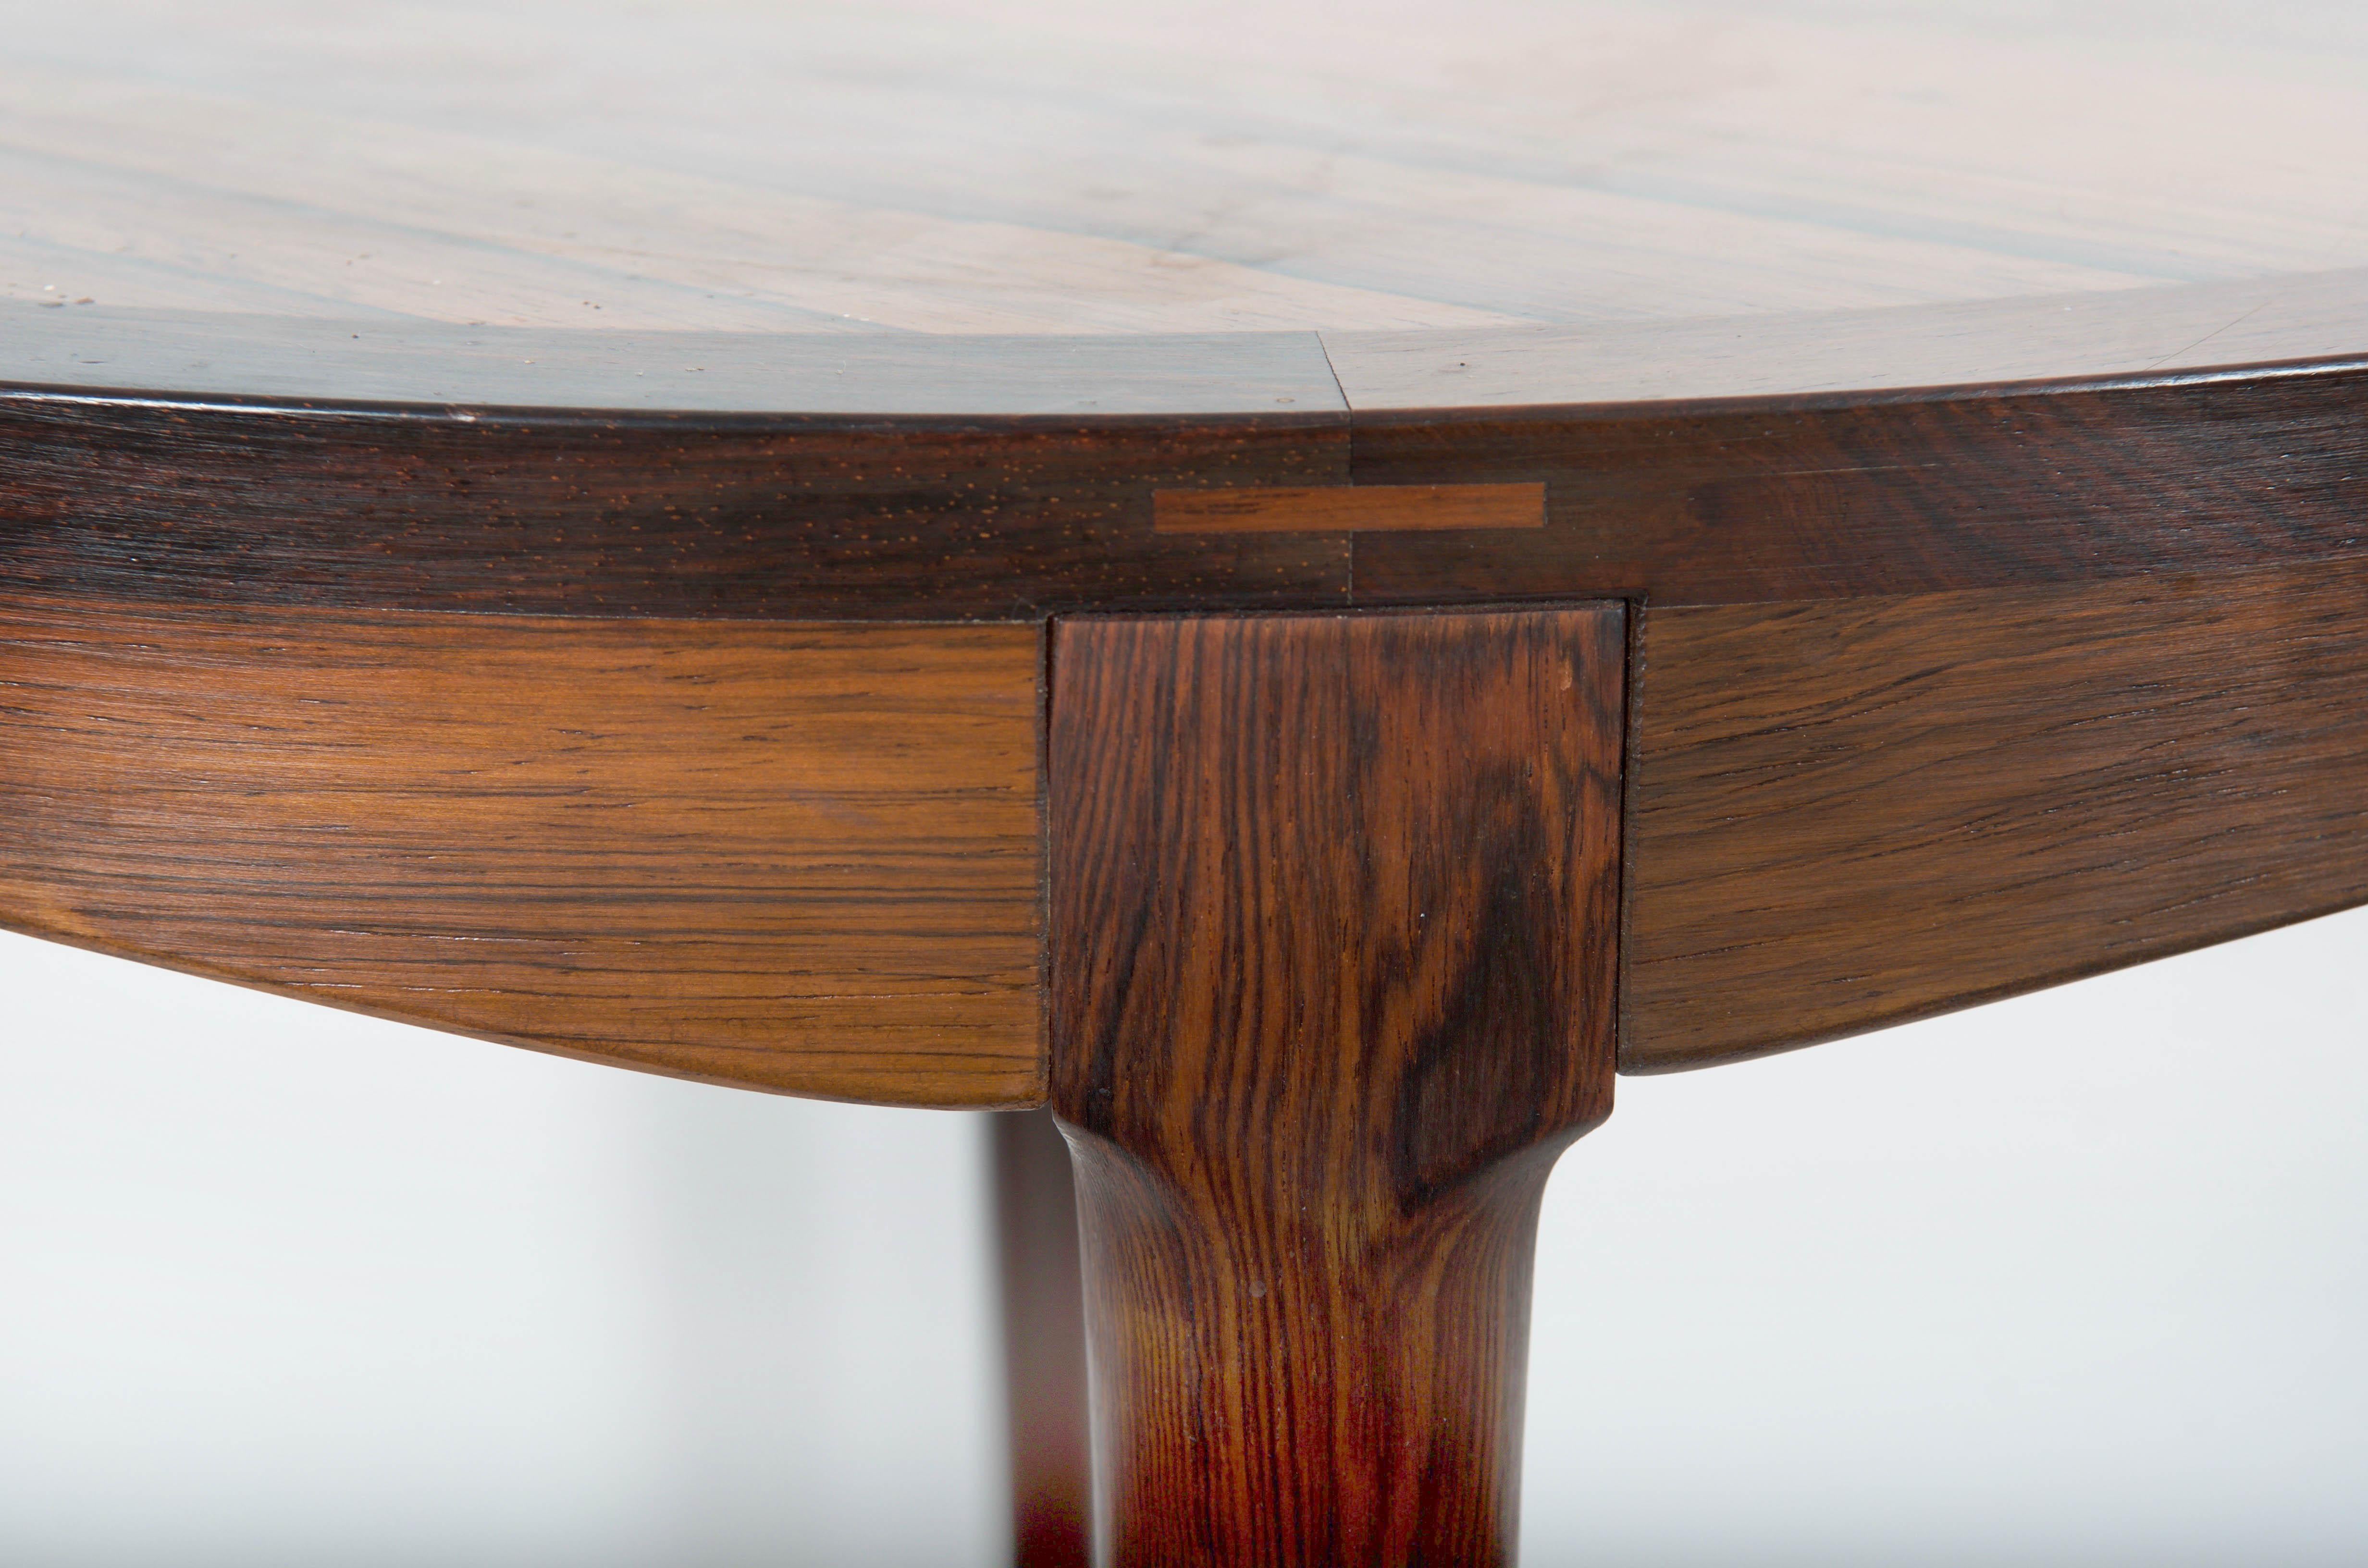 Hardwood side table designed in Norway in the 1960s by Haug Snekkeria for Bruksbo. Very good original condition.